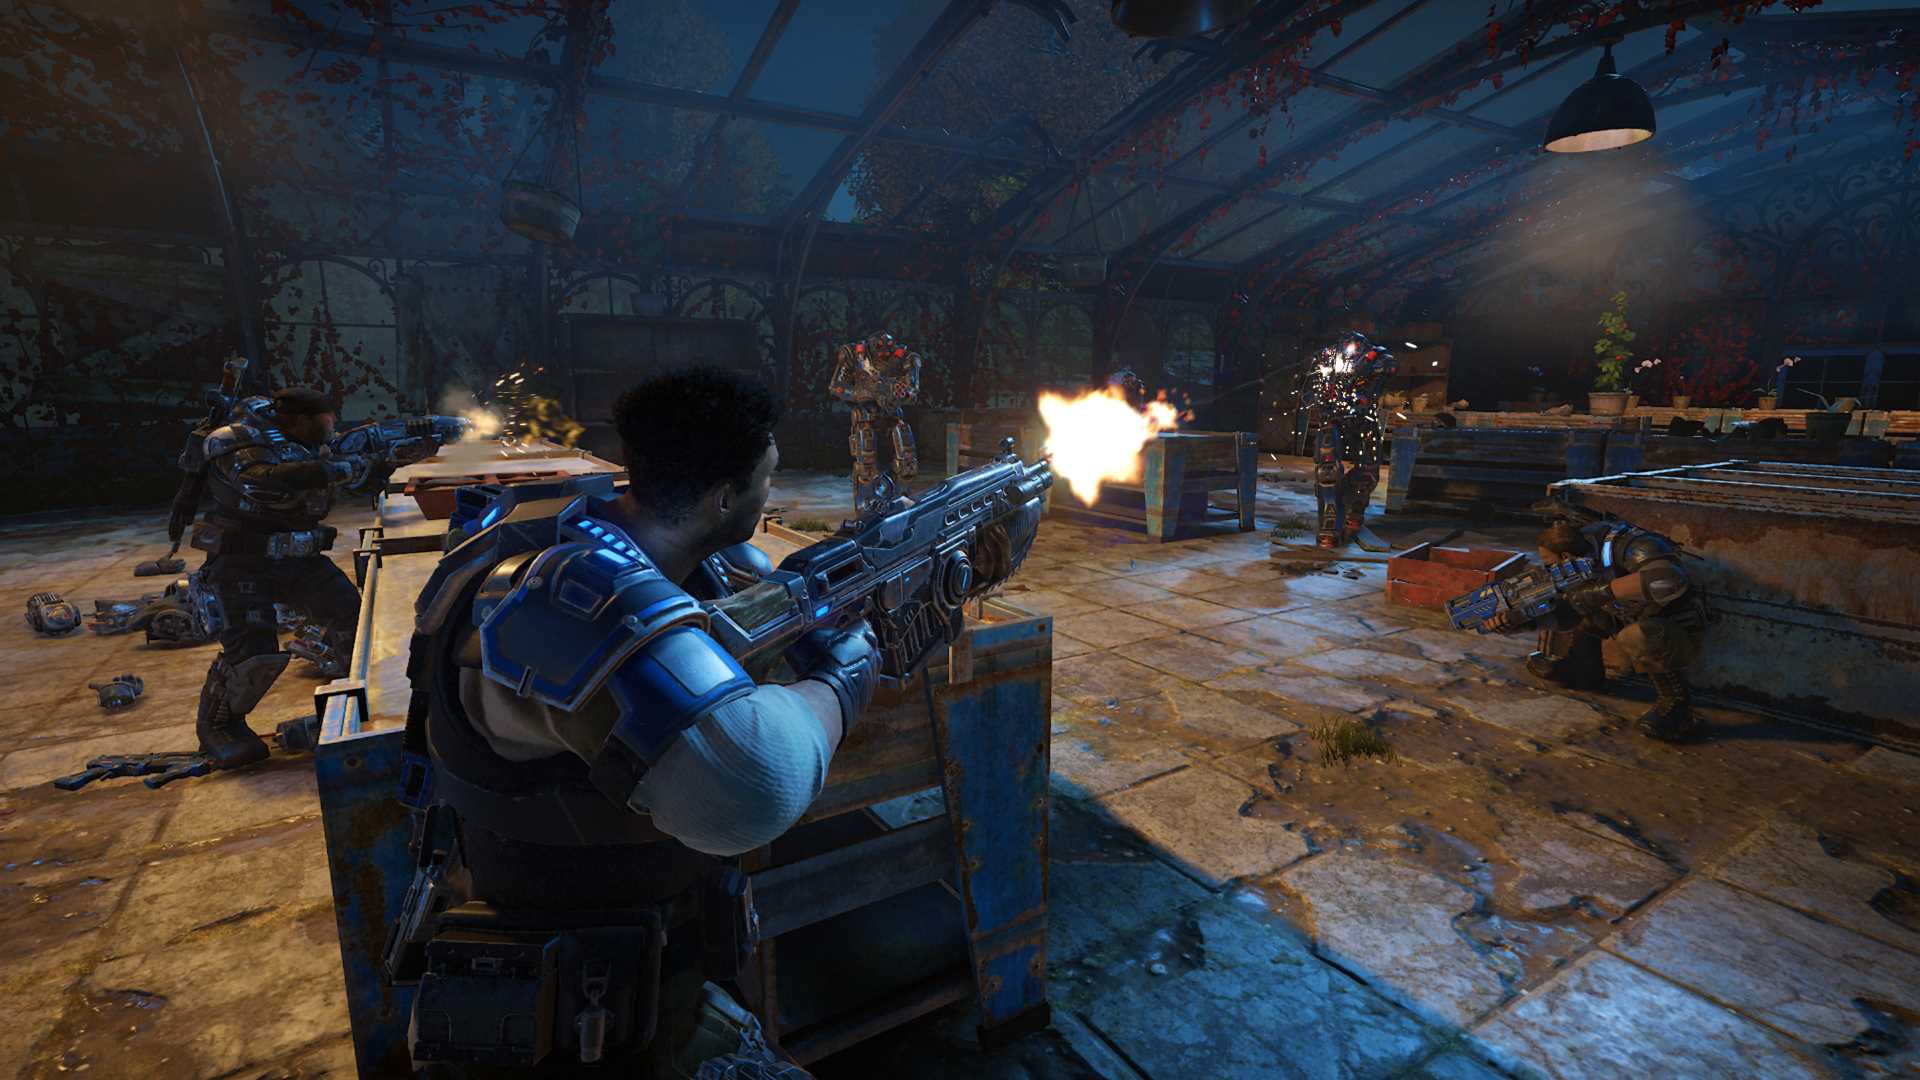 Gears of War 4 PC review